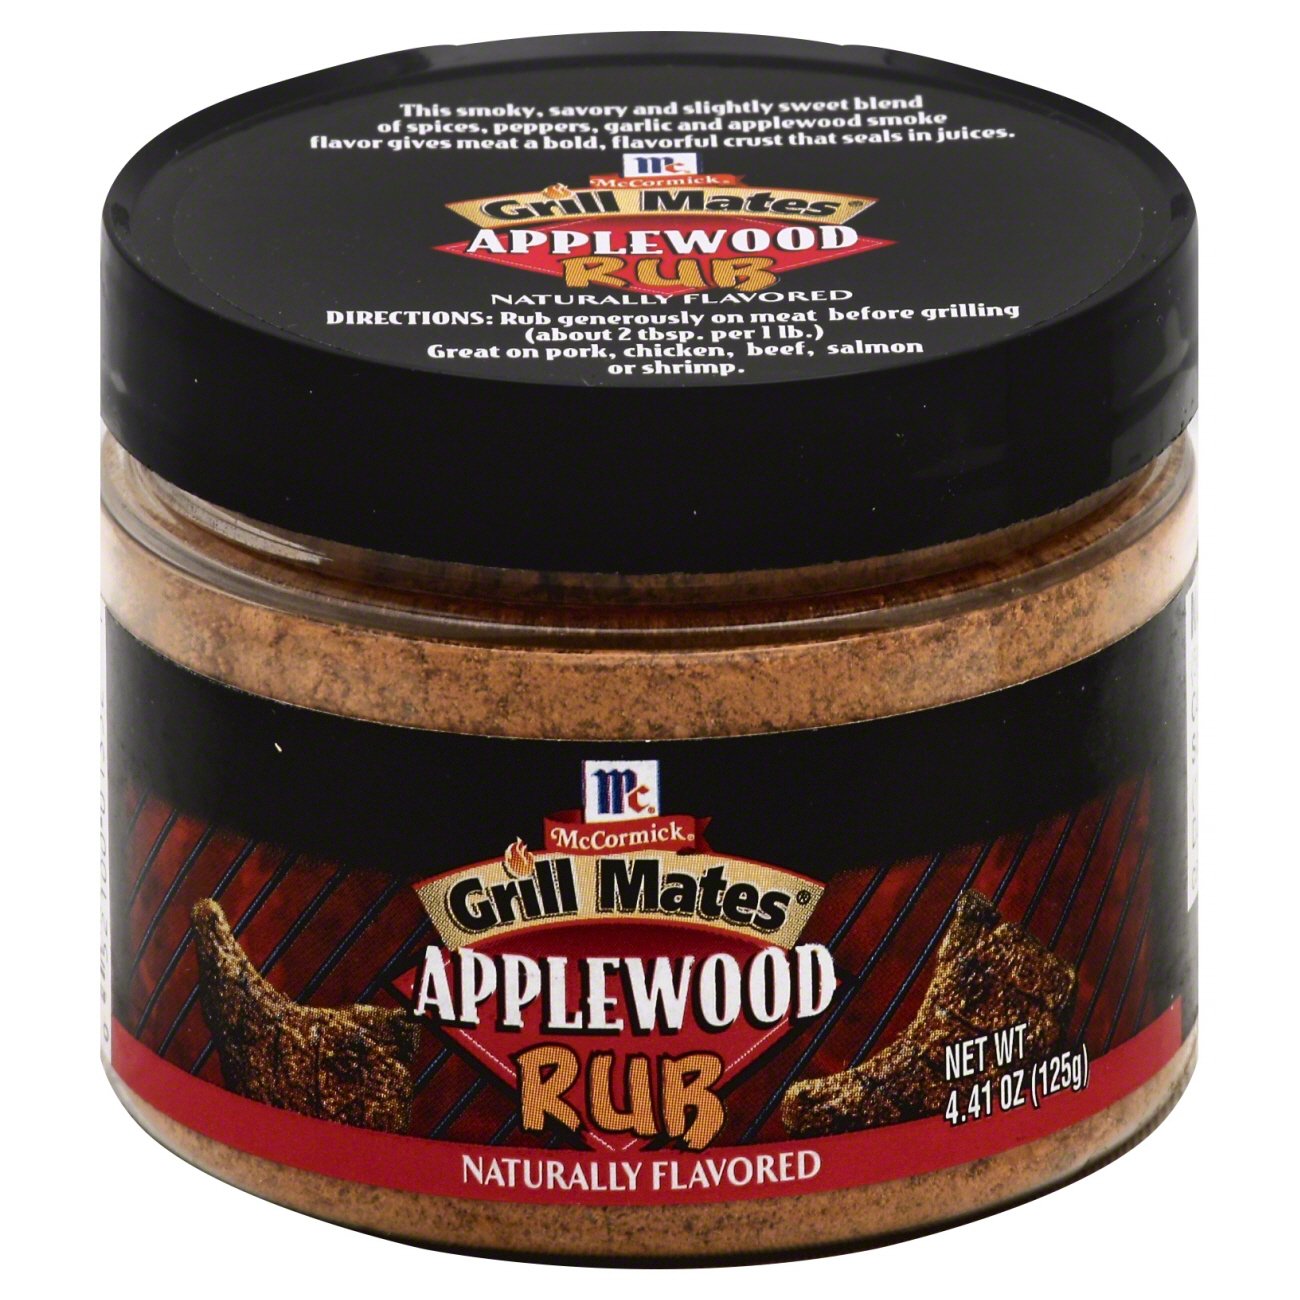 McCormick Grill Mates Barbecue Rub, 6 oz Mixed Spices & Seasonings